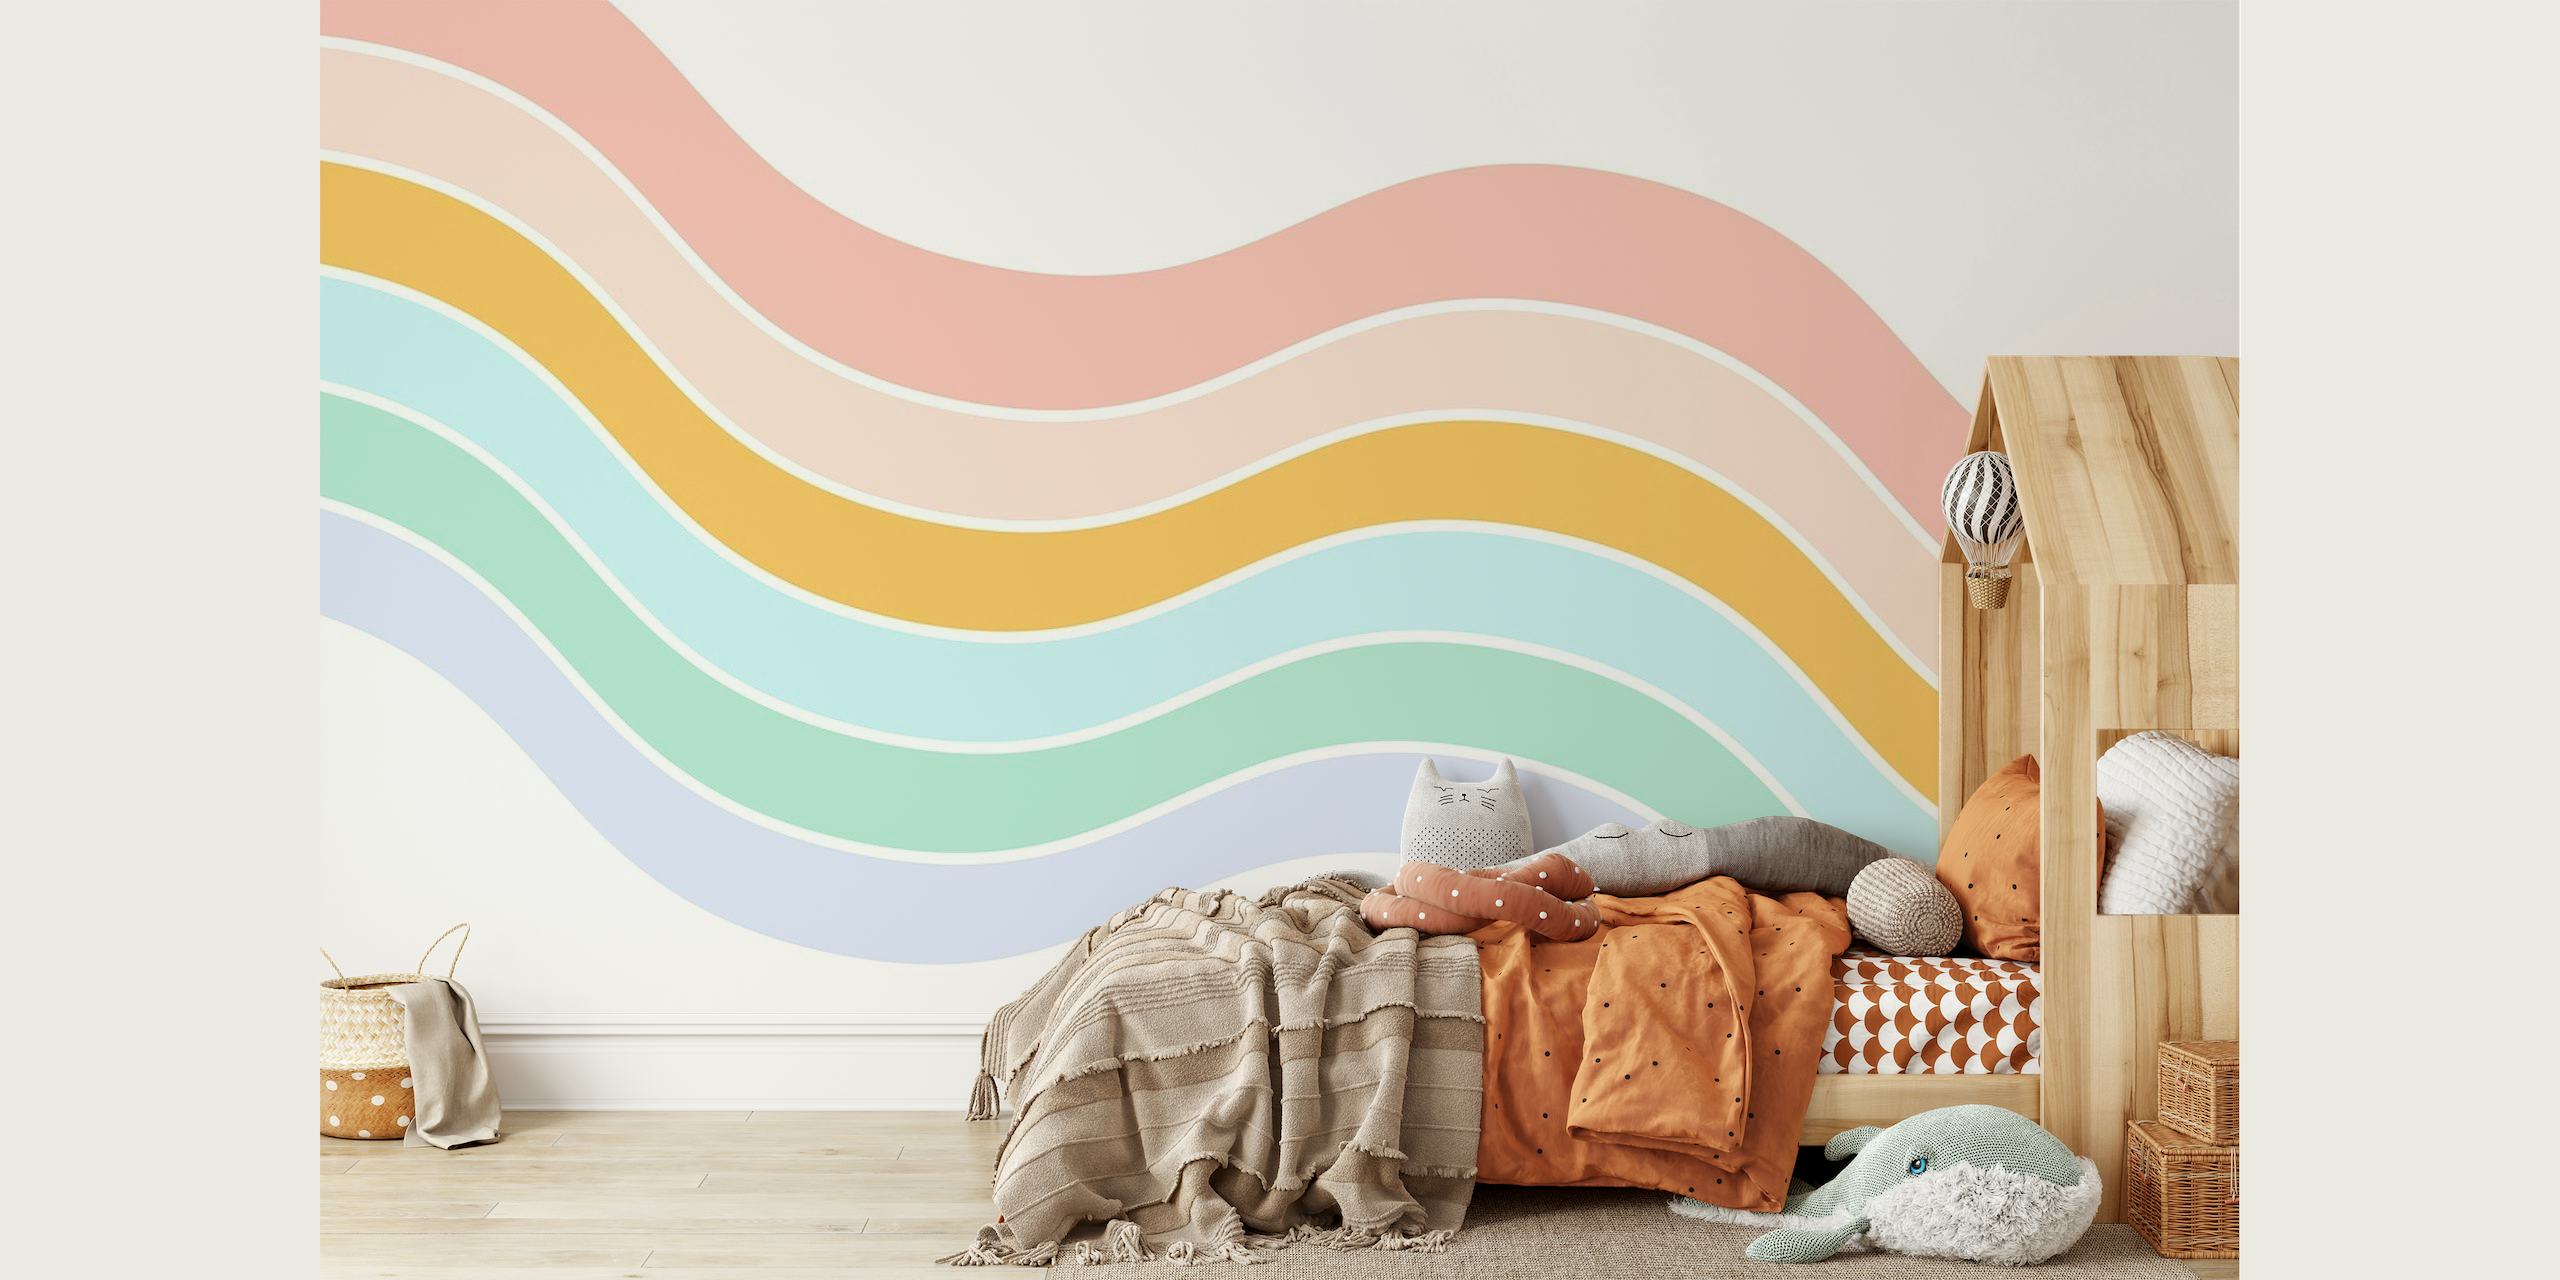 Abstract pastel colored waves wall mural creating a calming aesthetic